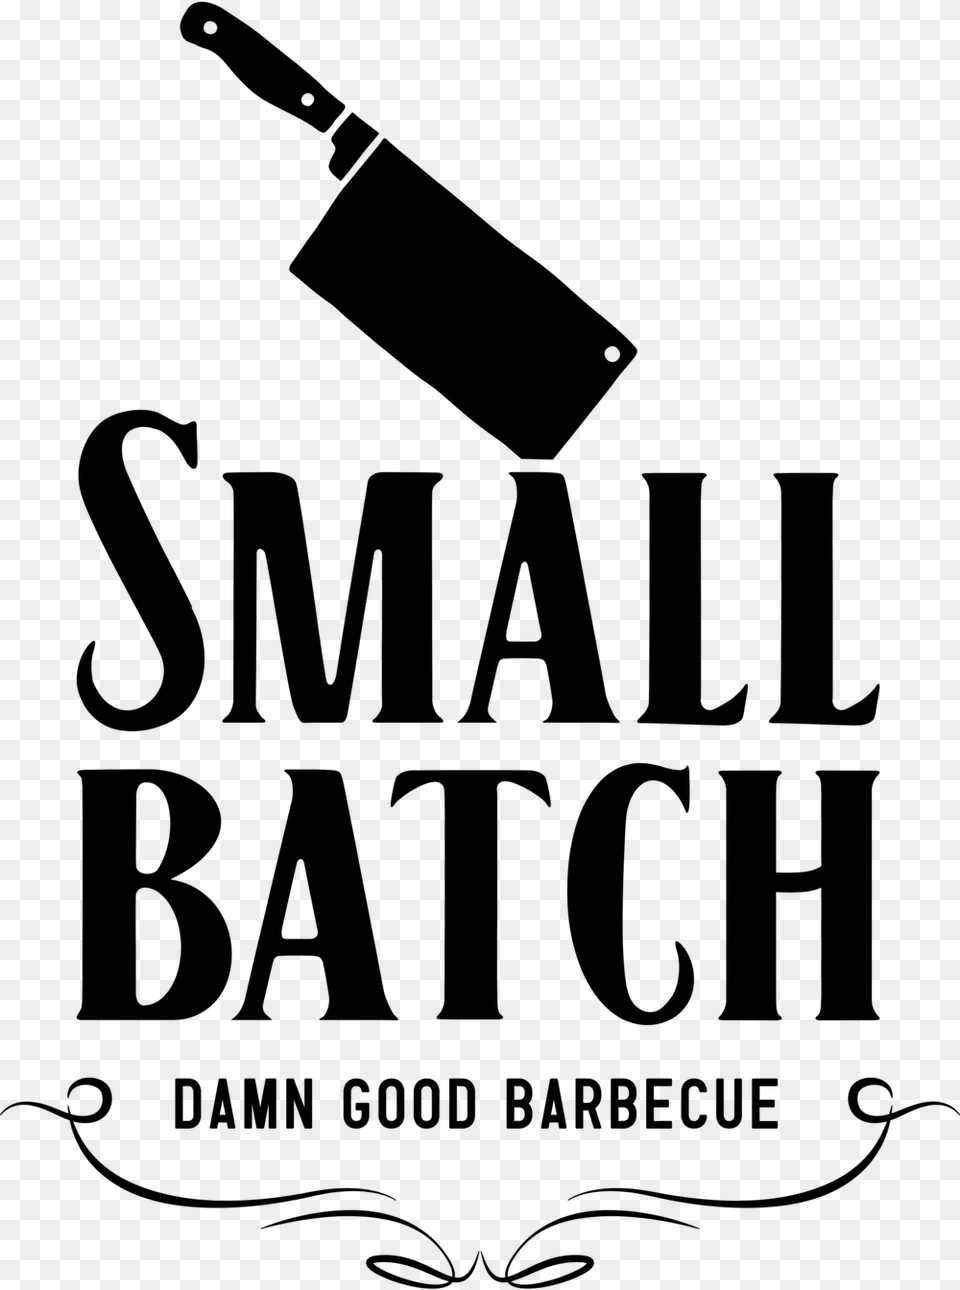 Smallbatchtshirtart Small Batch Barbecue, Gray Free Transparent Png